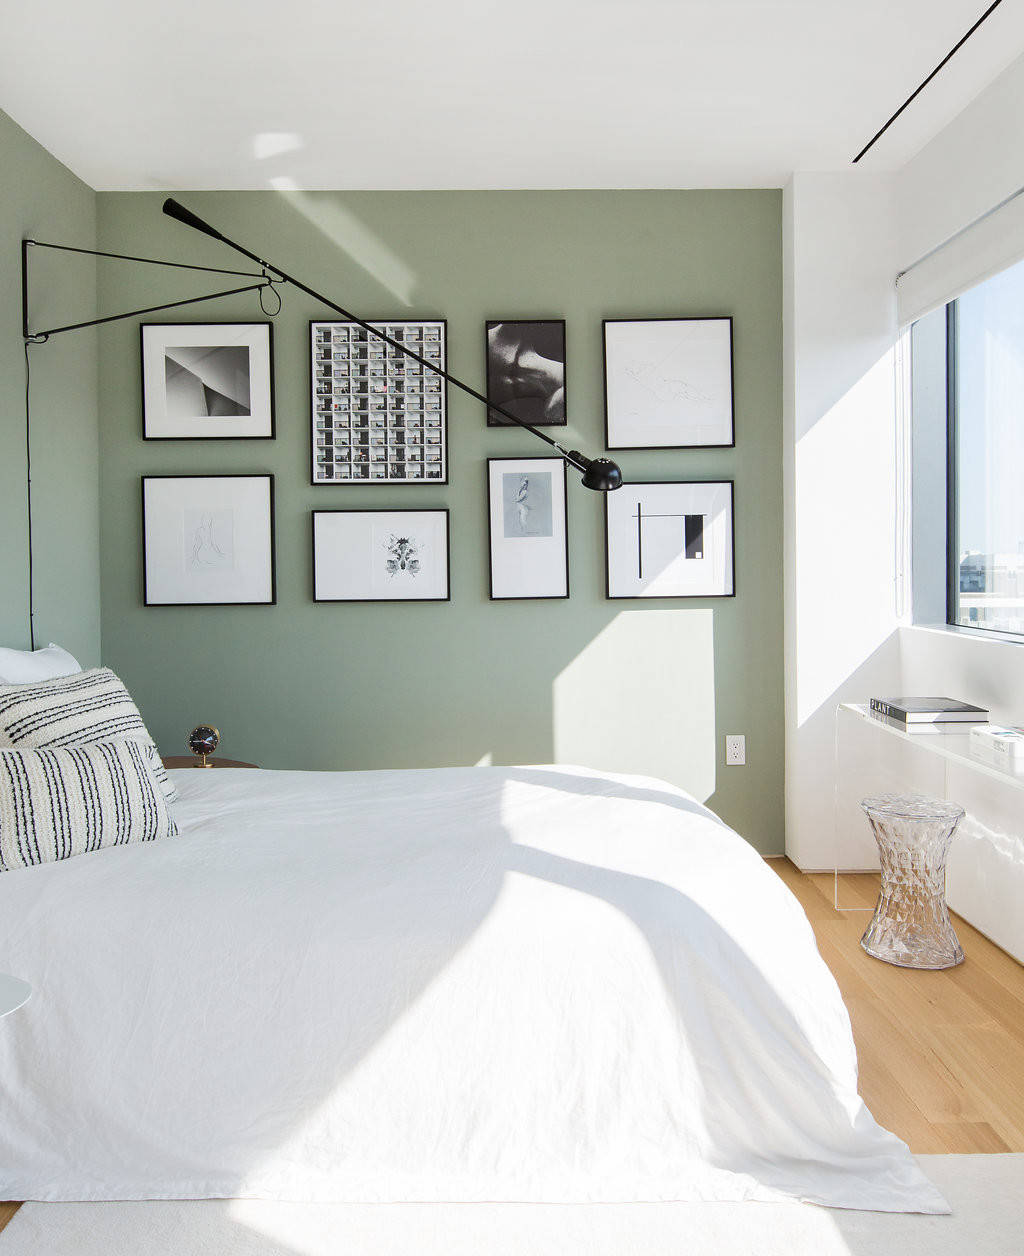 Sage Wall In Bedroom - 10 Sage Green Paint Colors That Bring Peace And Calm Best Sage Green Paint Colors - Oct 30 2013 sage green master bedroom bedroom photos sage green walls design ideas pictures remodel and.